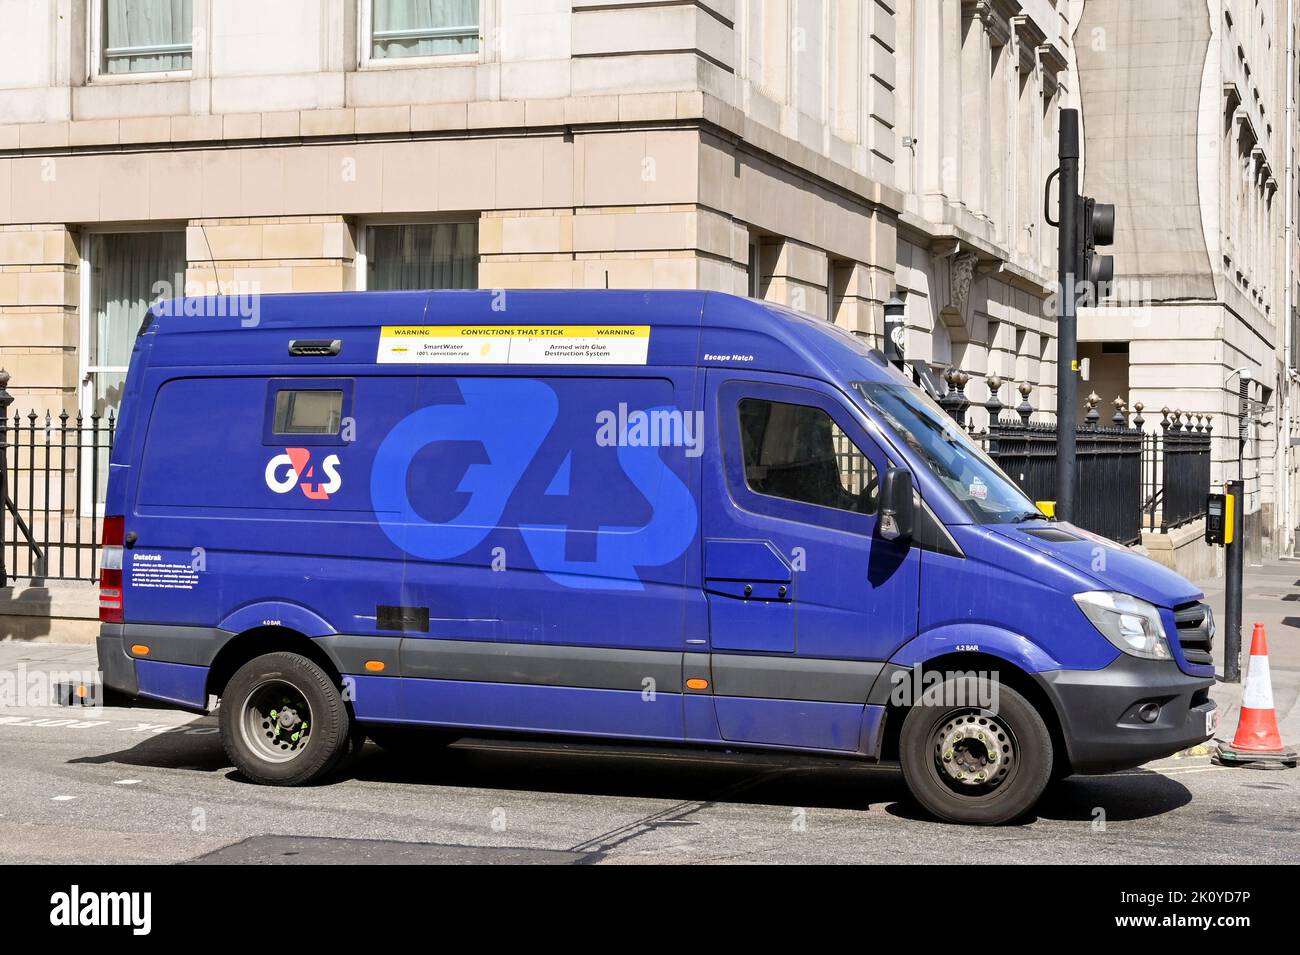 London, United Kingdom - June 2022: Amoured security van operated by the G4S company parked on a city street Stock Photo